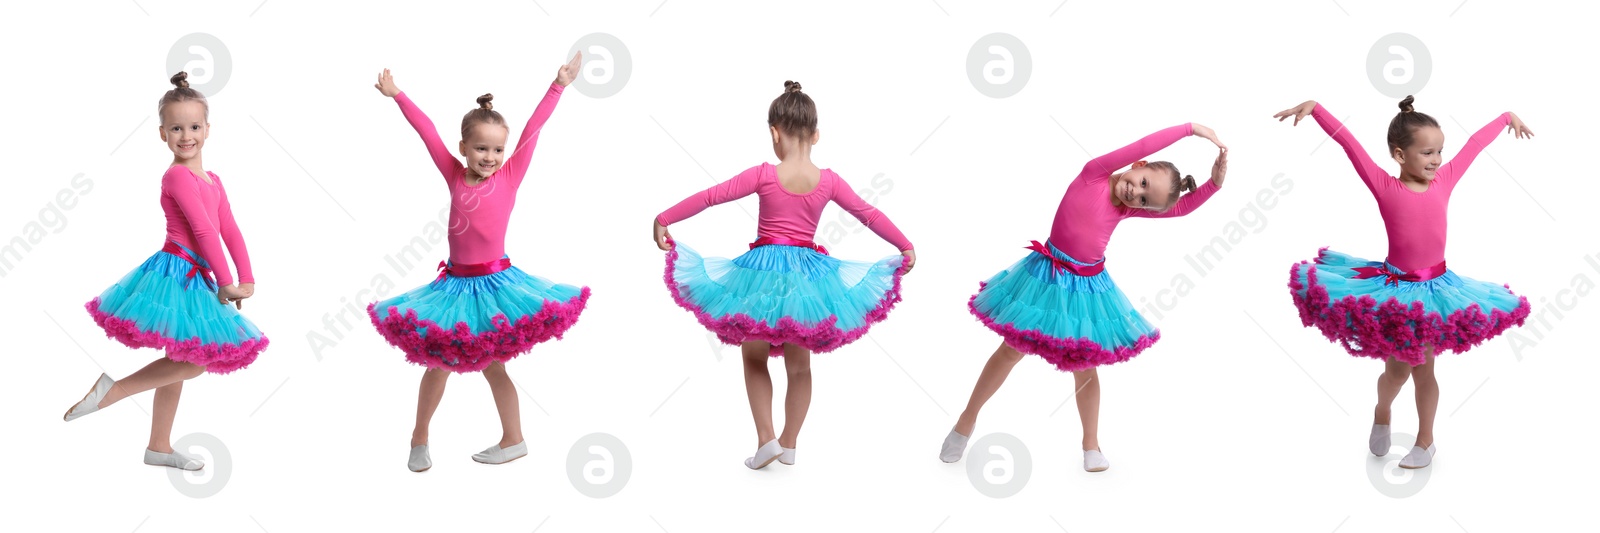 Image of Cute little girl in costume dancing on white background, set of photos